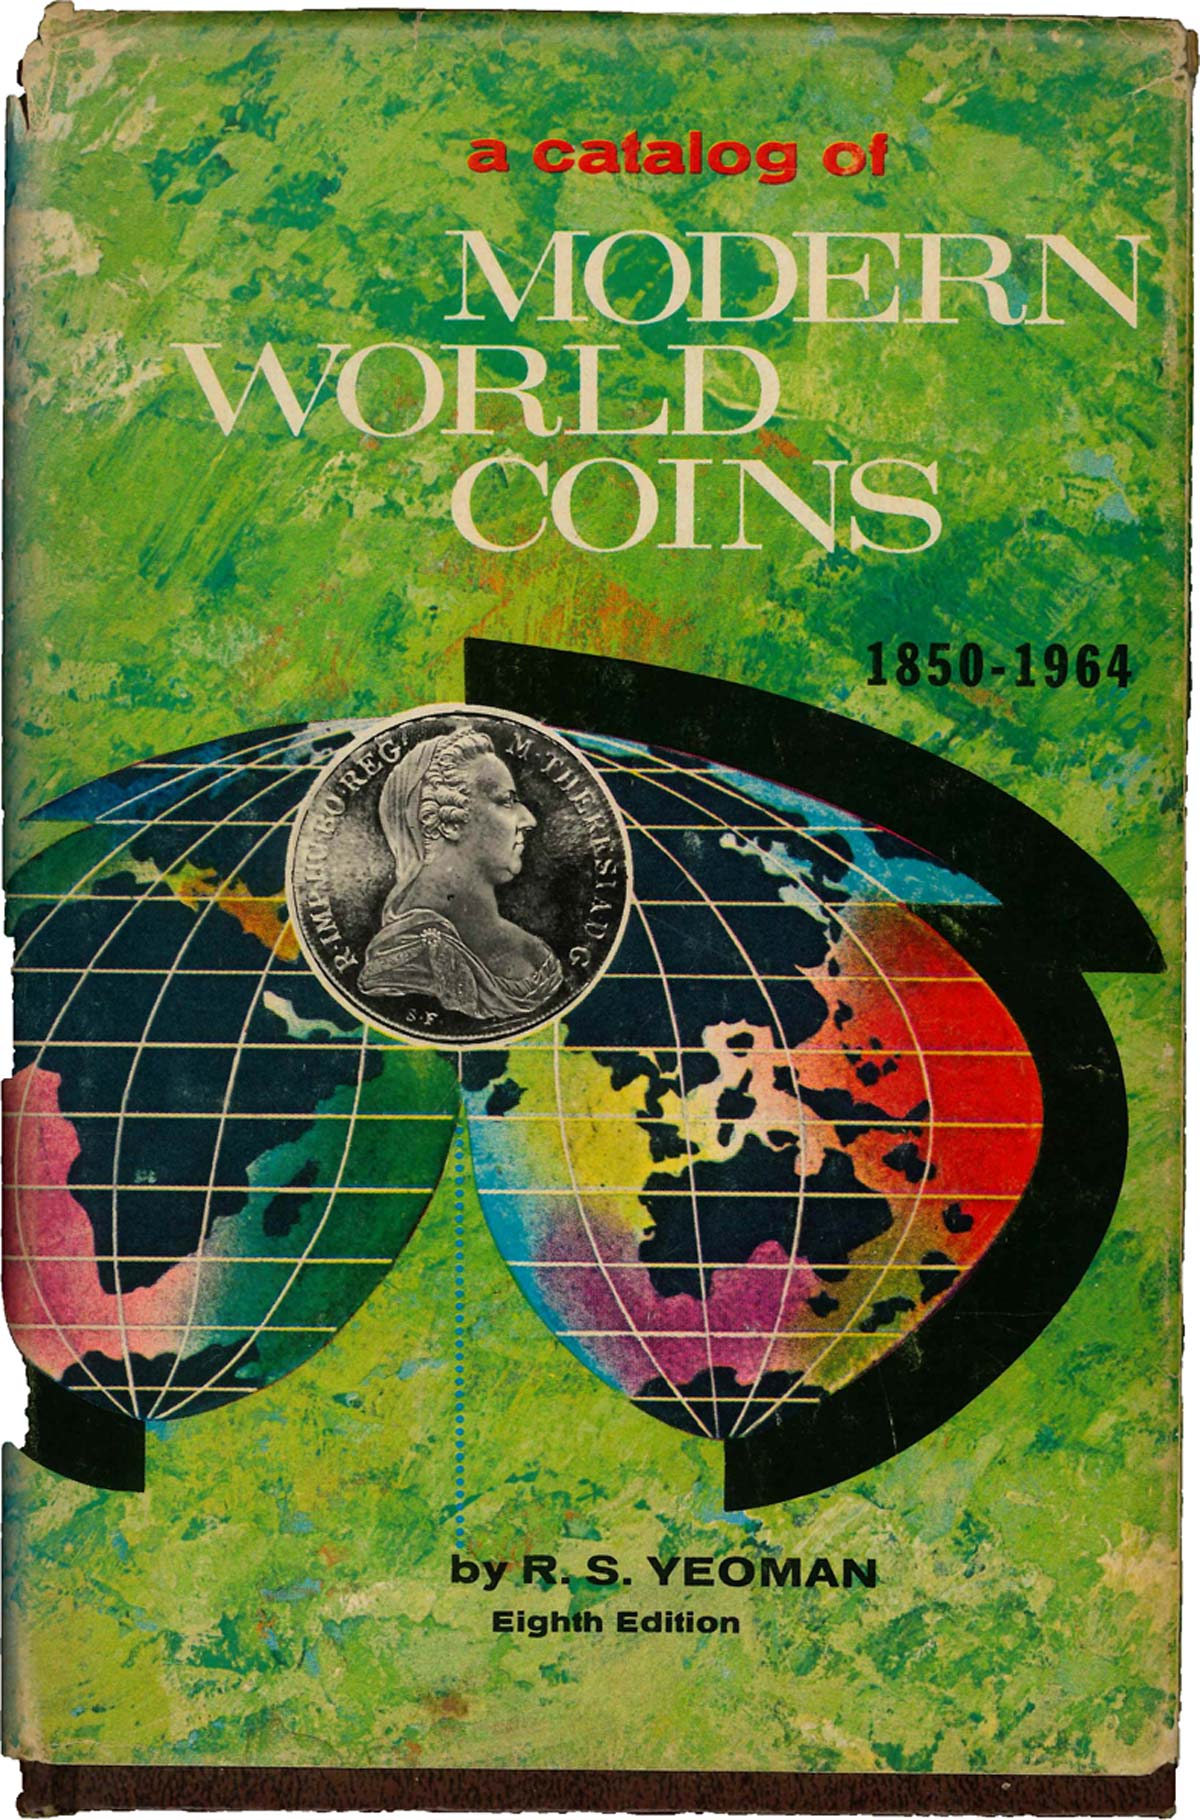 A catalog of modern World Coins 1850-1964 - Eighth Edition YEOMAN R.-S.